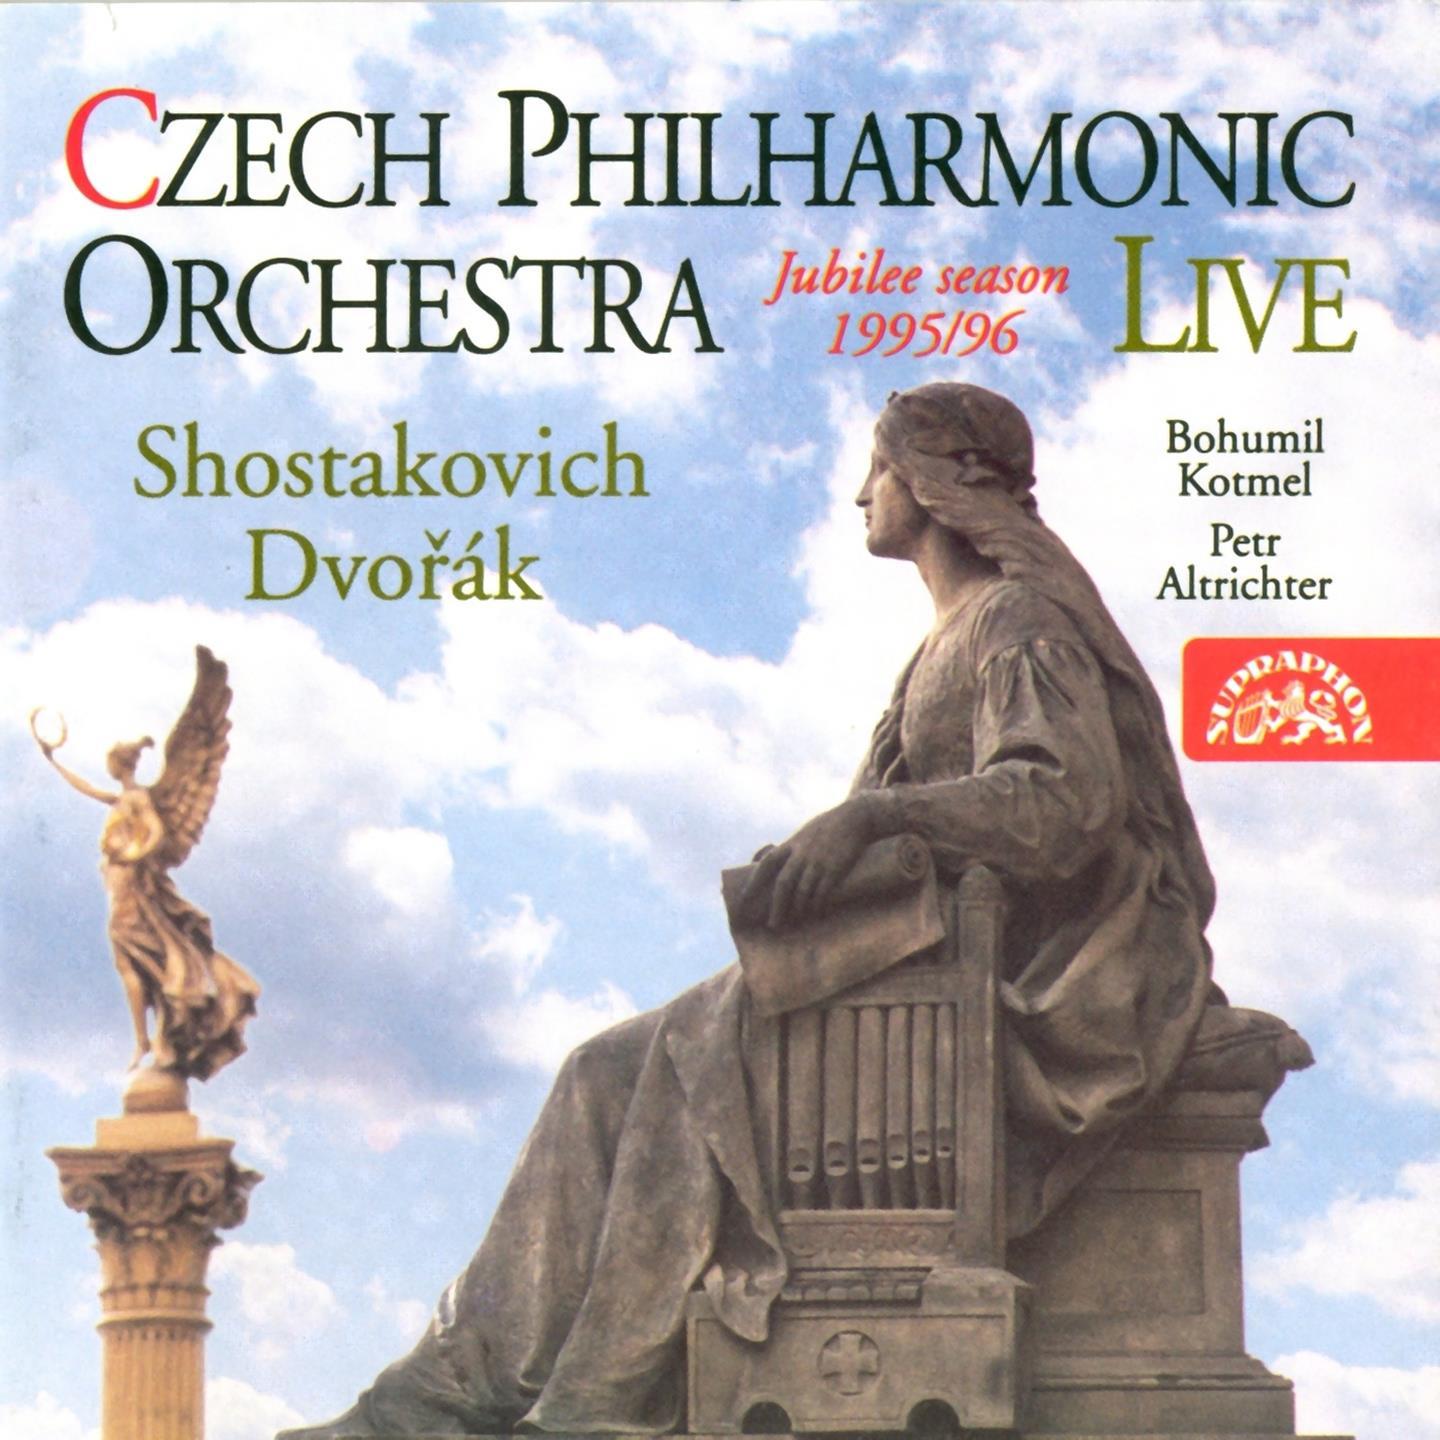 Suite for Orchestra in A Major, Op. 98a, B. 190: III. Moderato alla pollacca